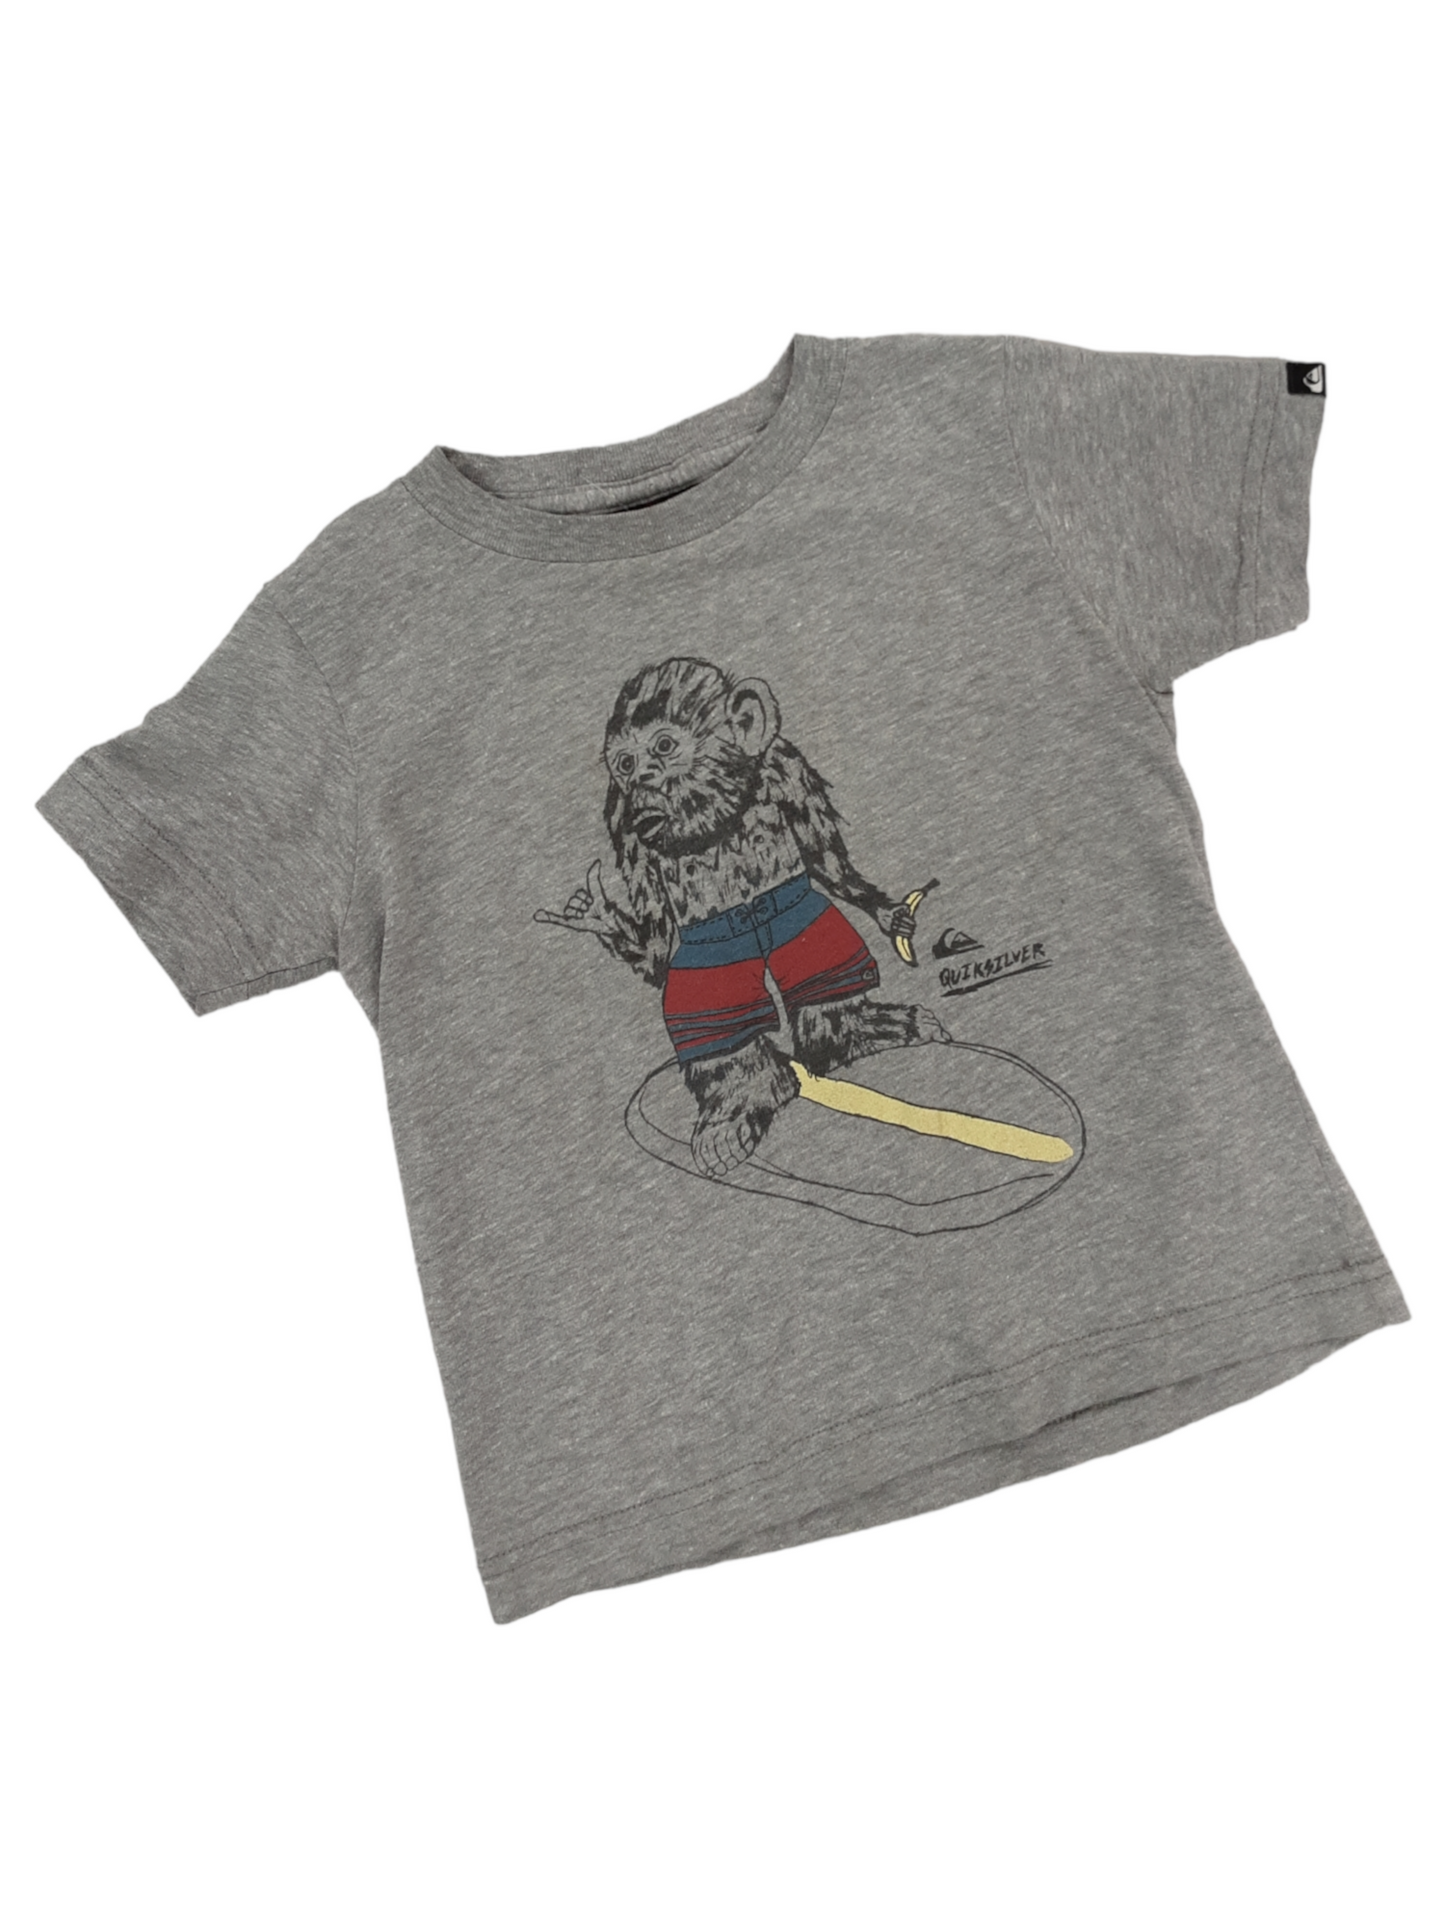 Surfer monkey tee size 18 to 24 months